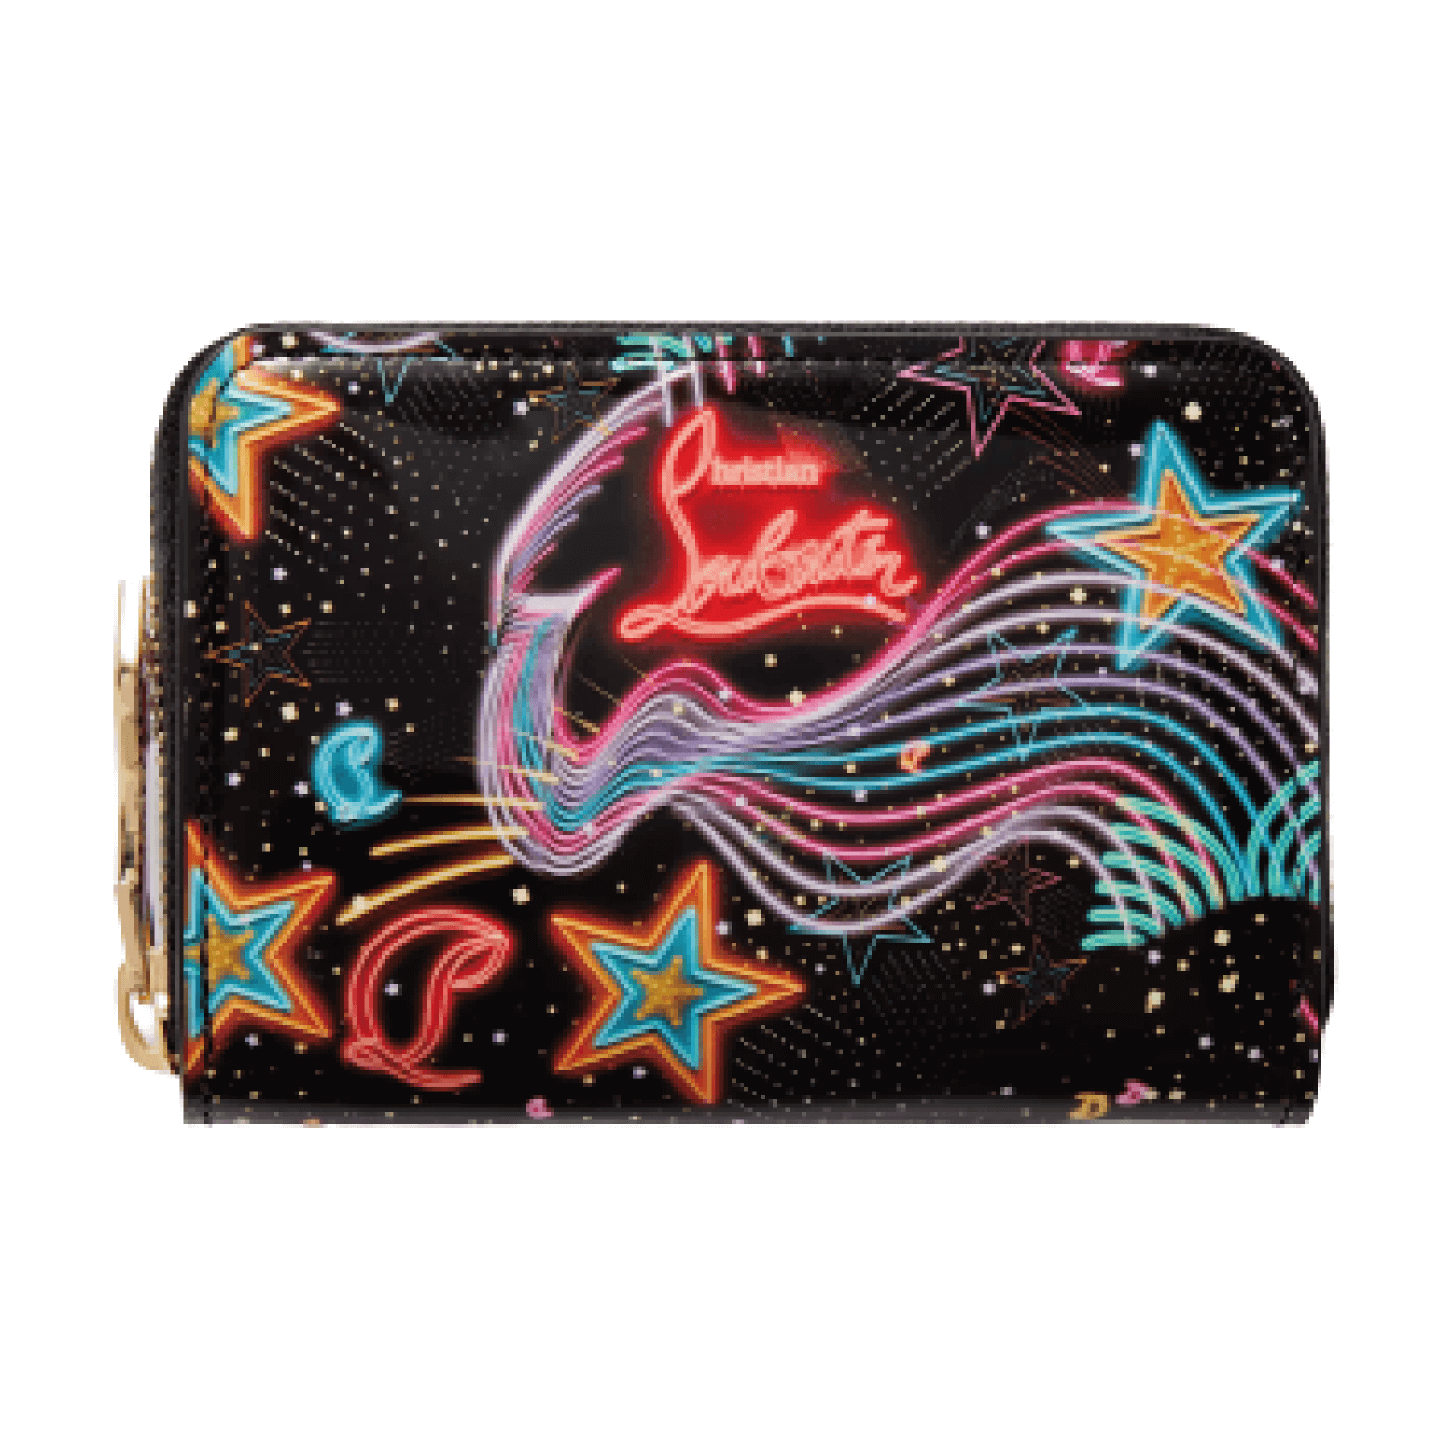 Christian Louboutin Panettone Printed Patent-Leather Wallet